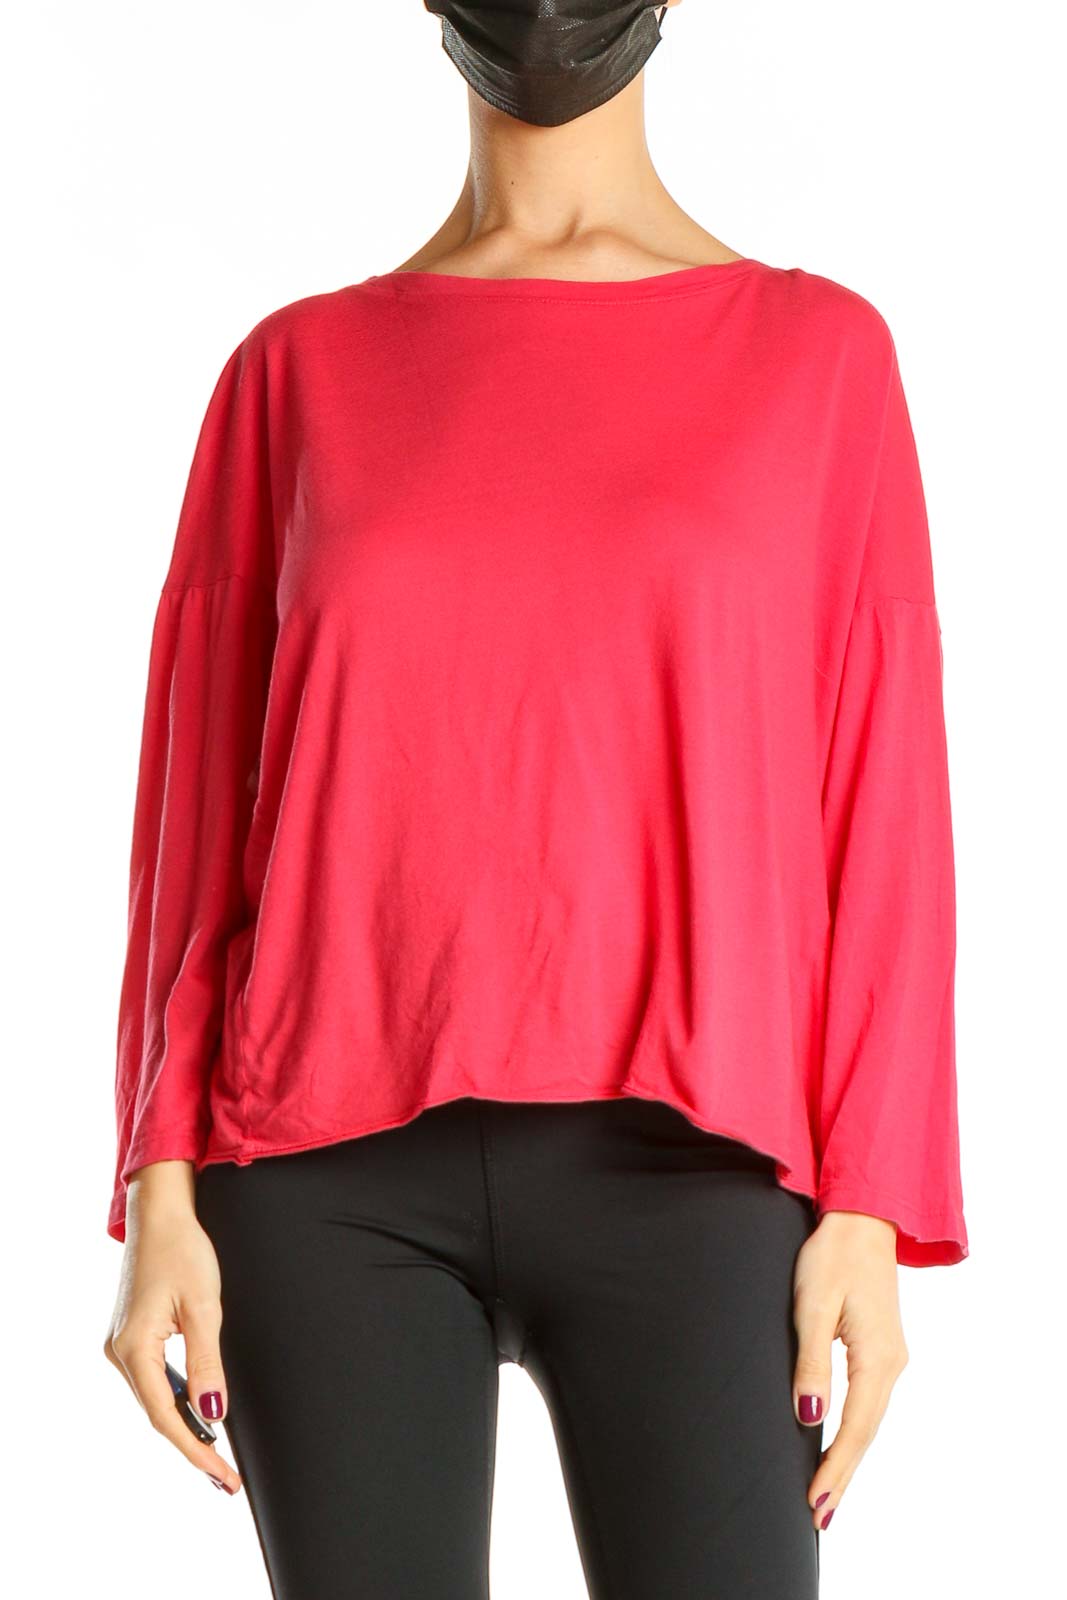 Pink All Day Wear Top Front